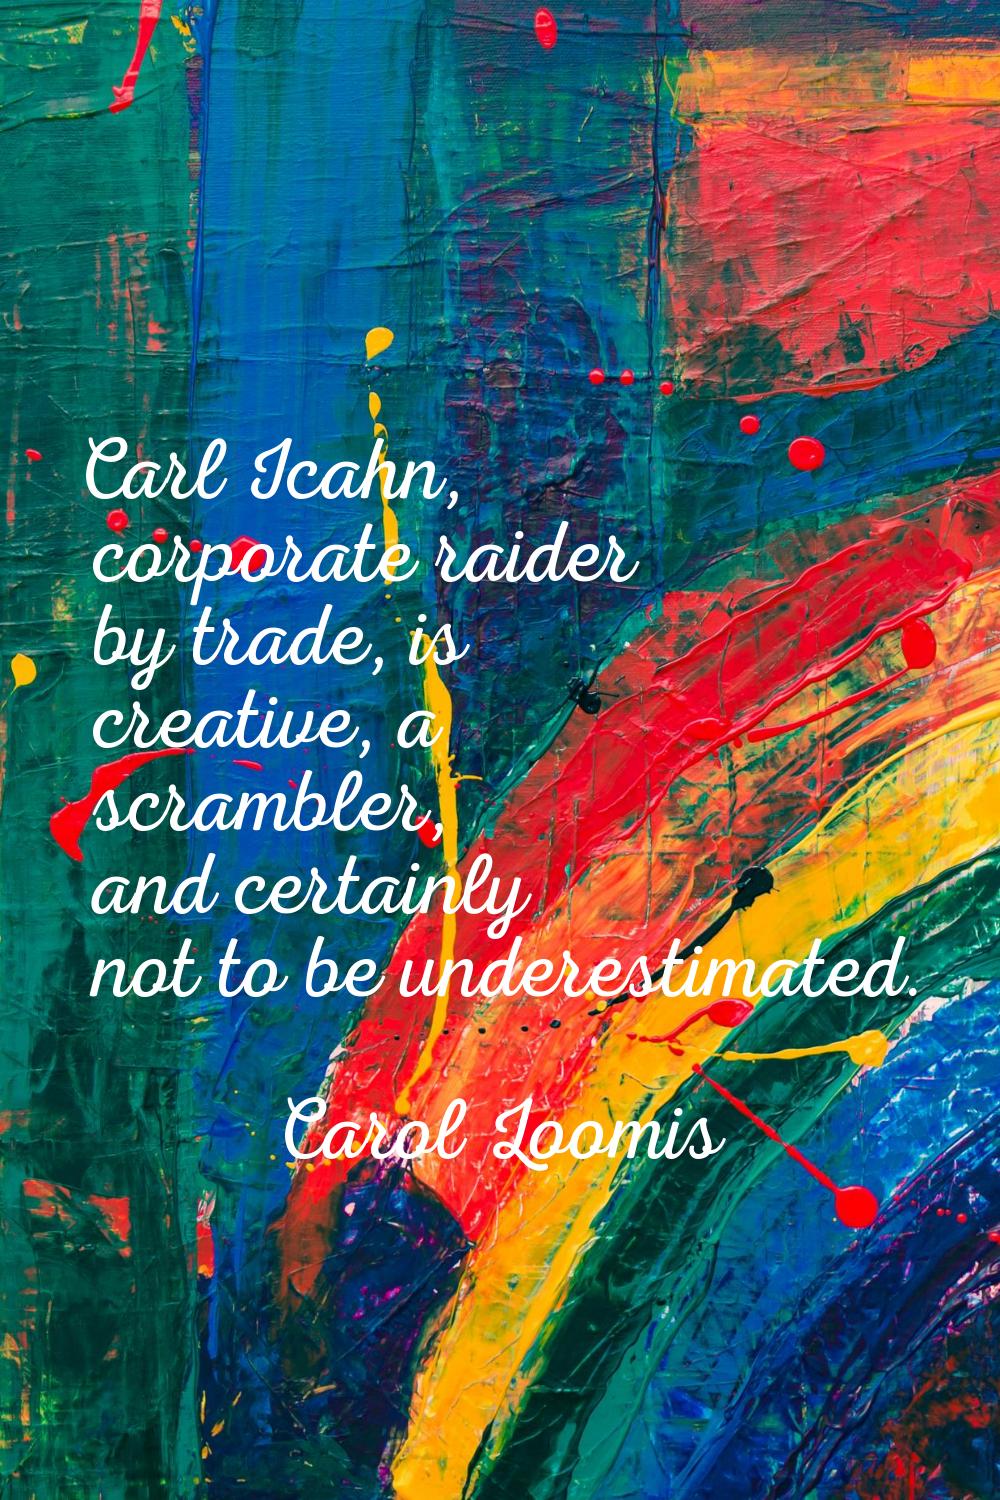 Carl Icahn, corporate raider by trade, is creative, a scrambler, and certainly not to be underestim